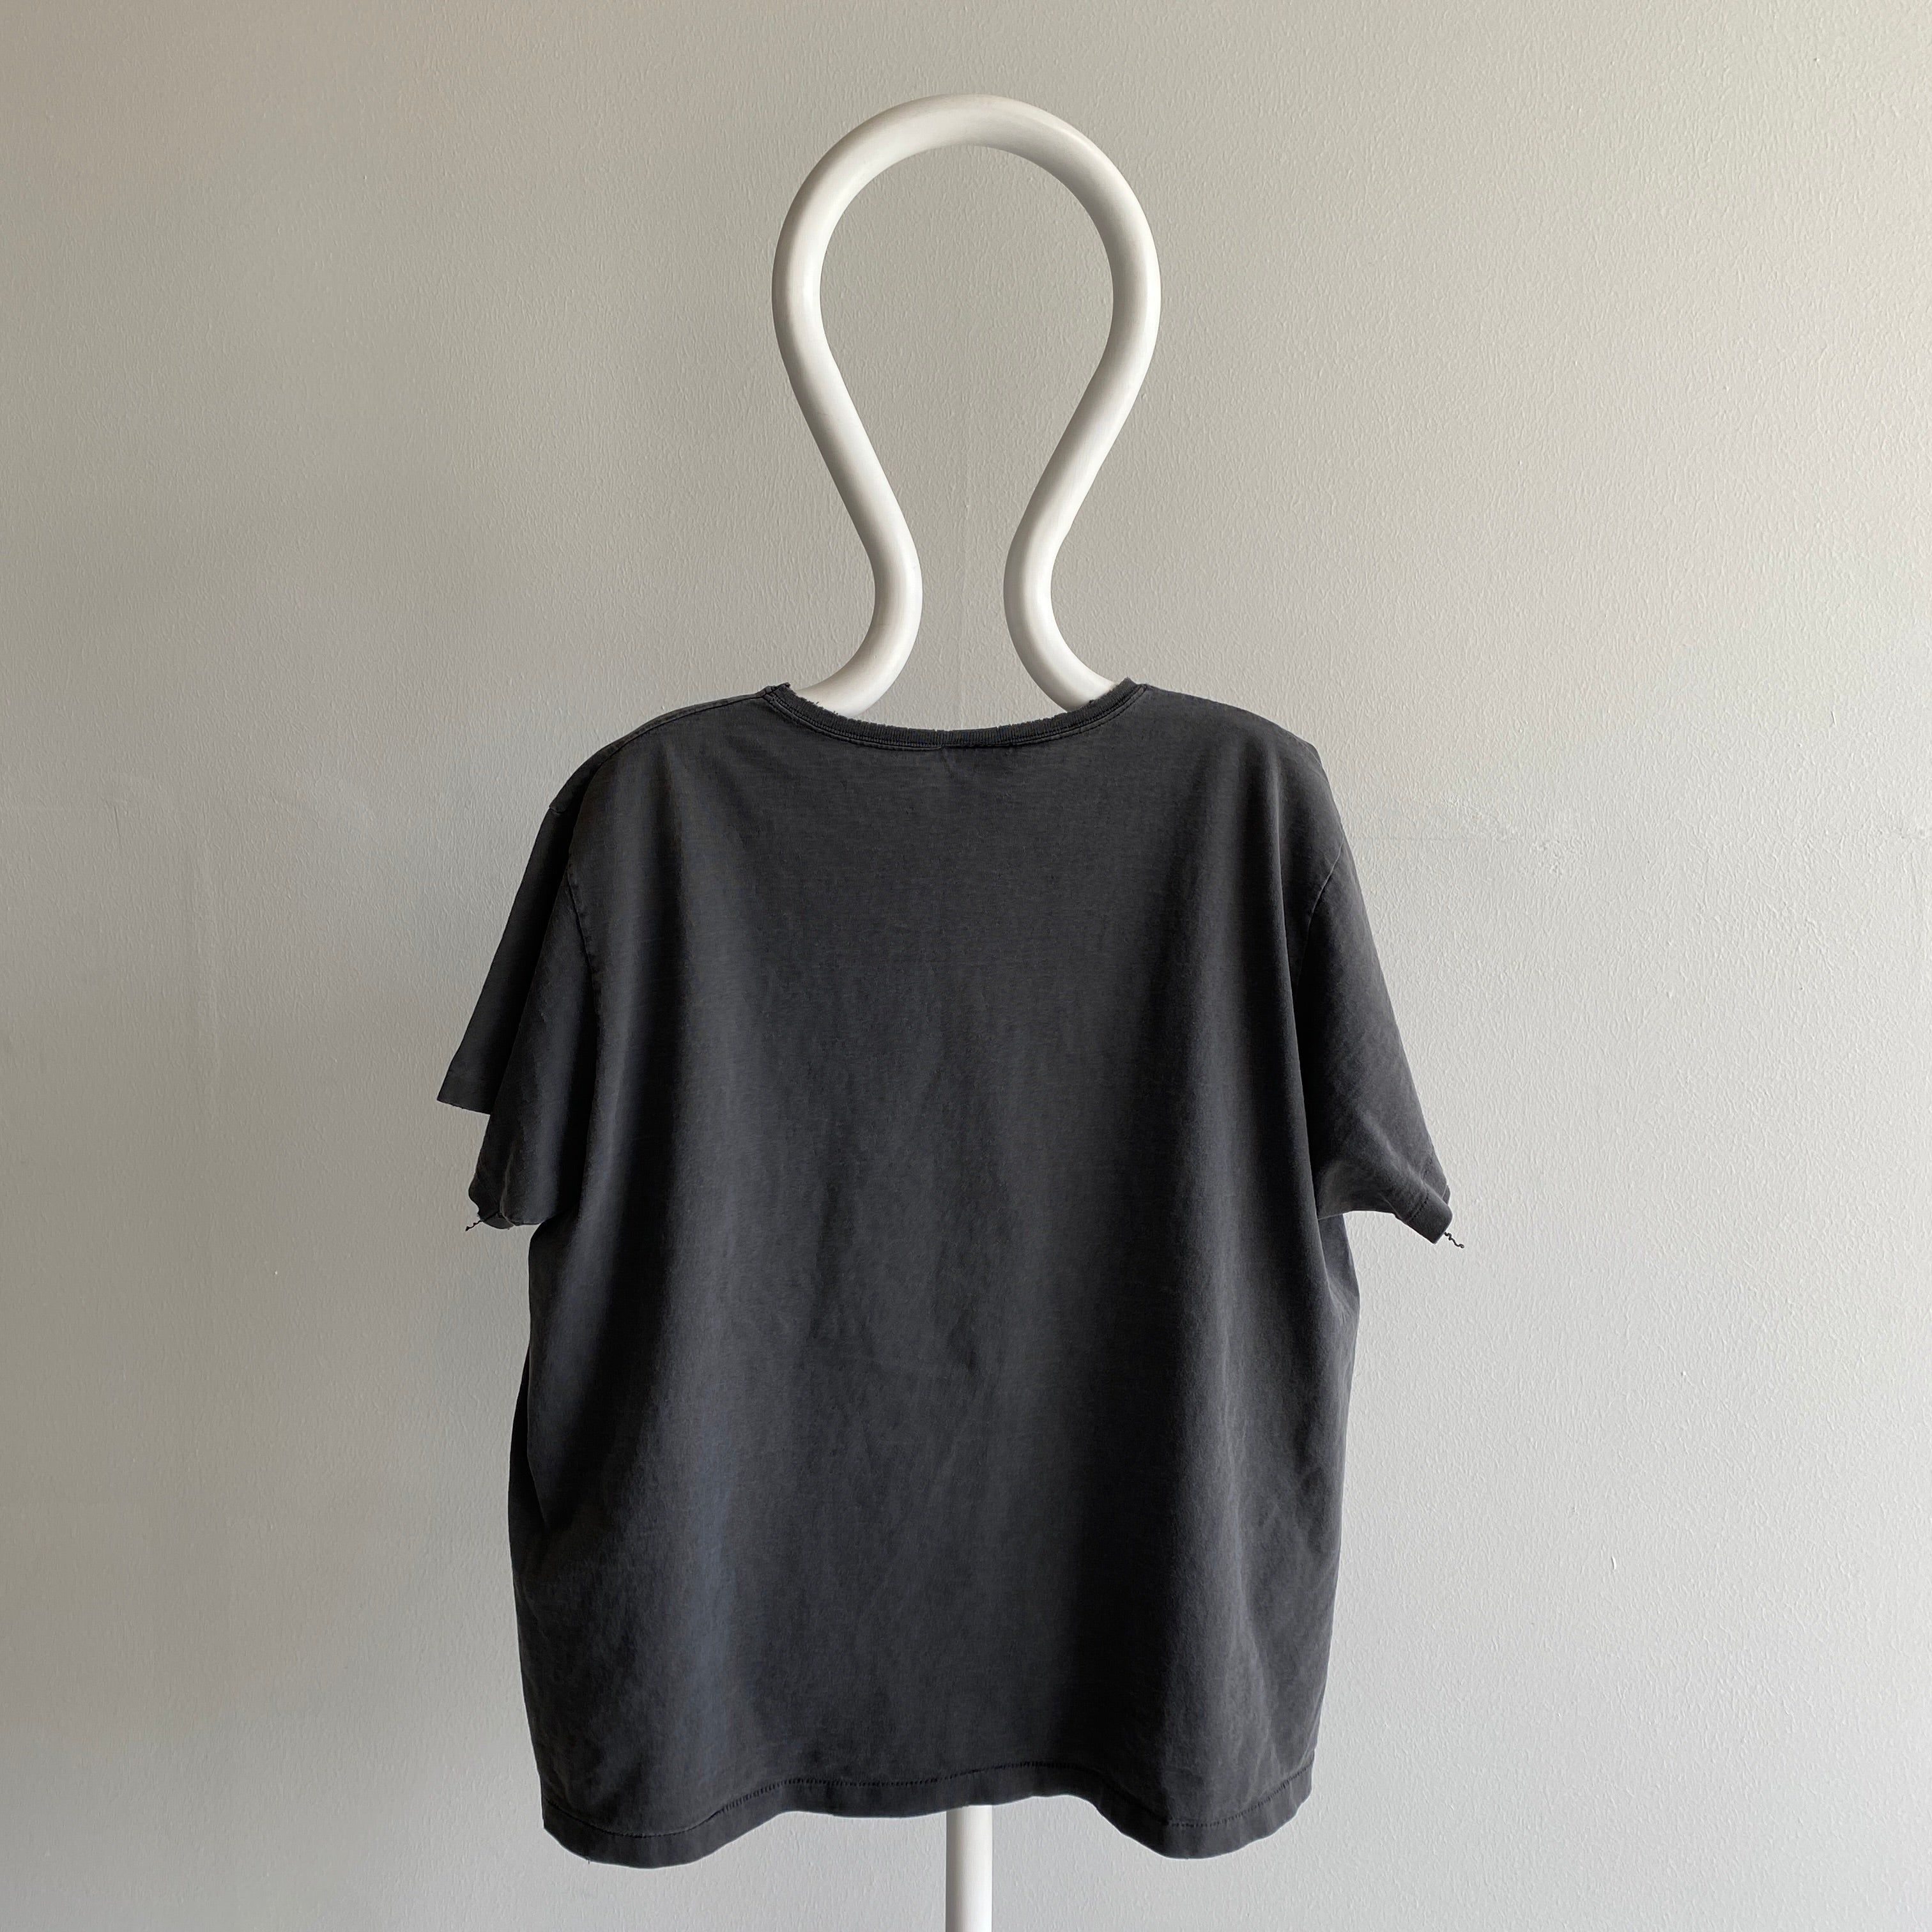 1990s Hanes Her Way Boxy Faded Super Stained Thin Collared Cotton Blank Black To Gray T-Shirt